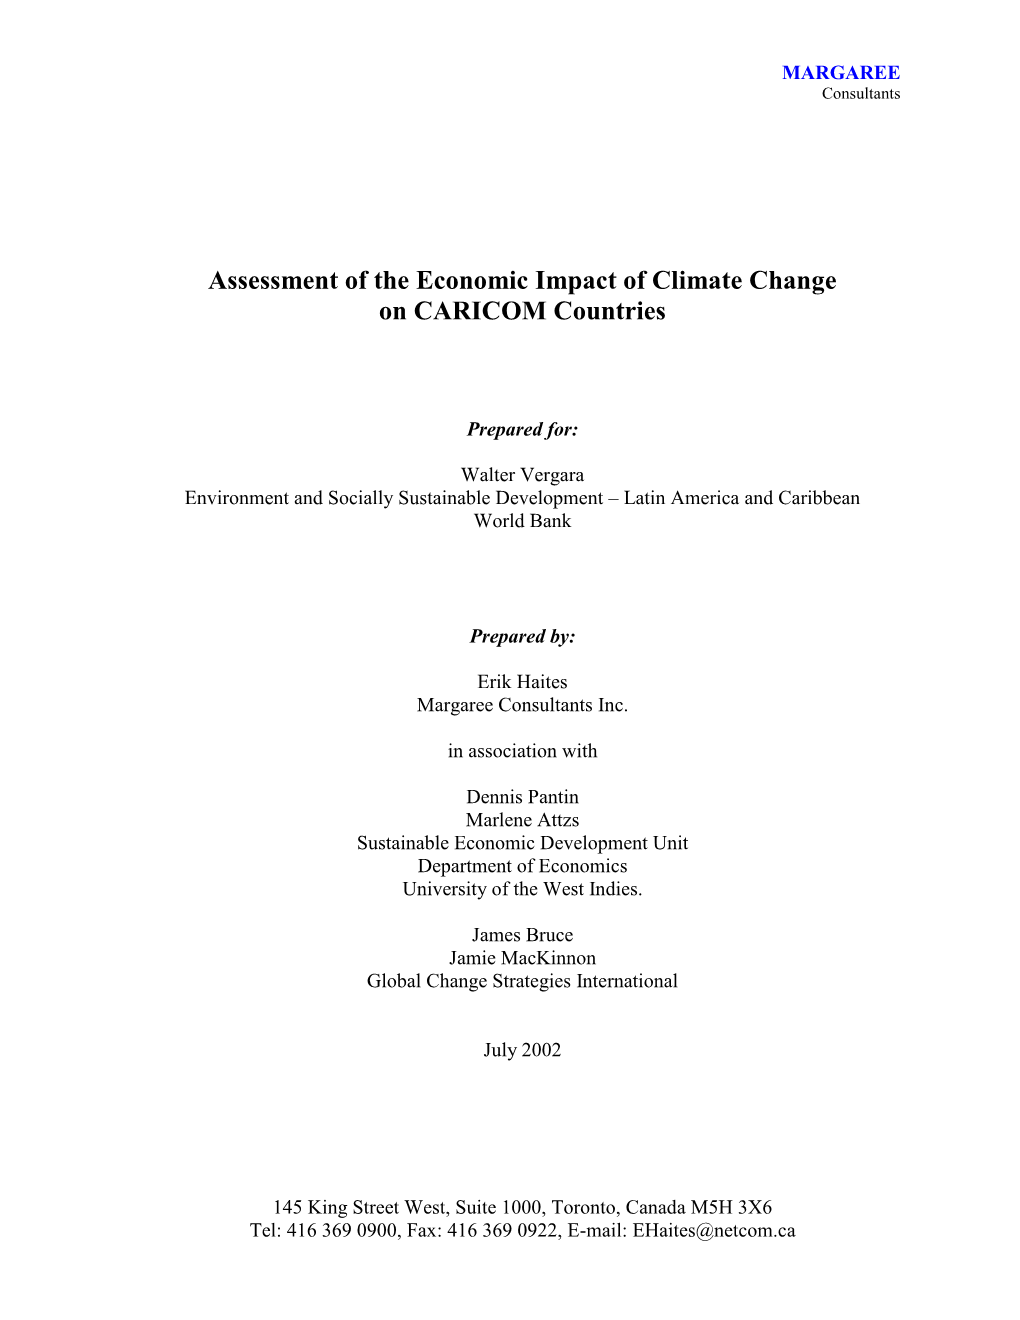 Assessment of Economic Impact of Climate Change